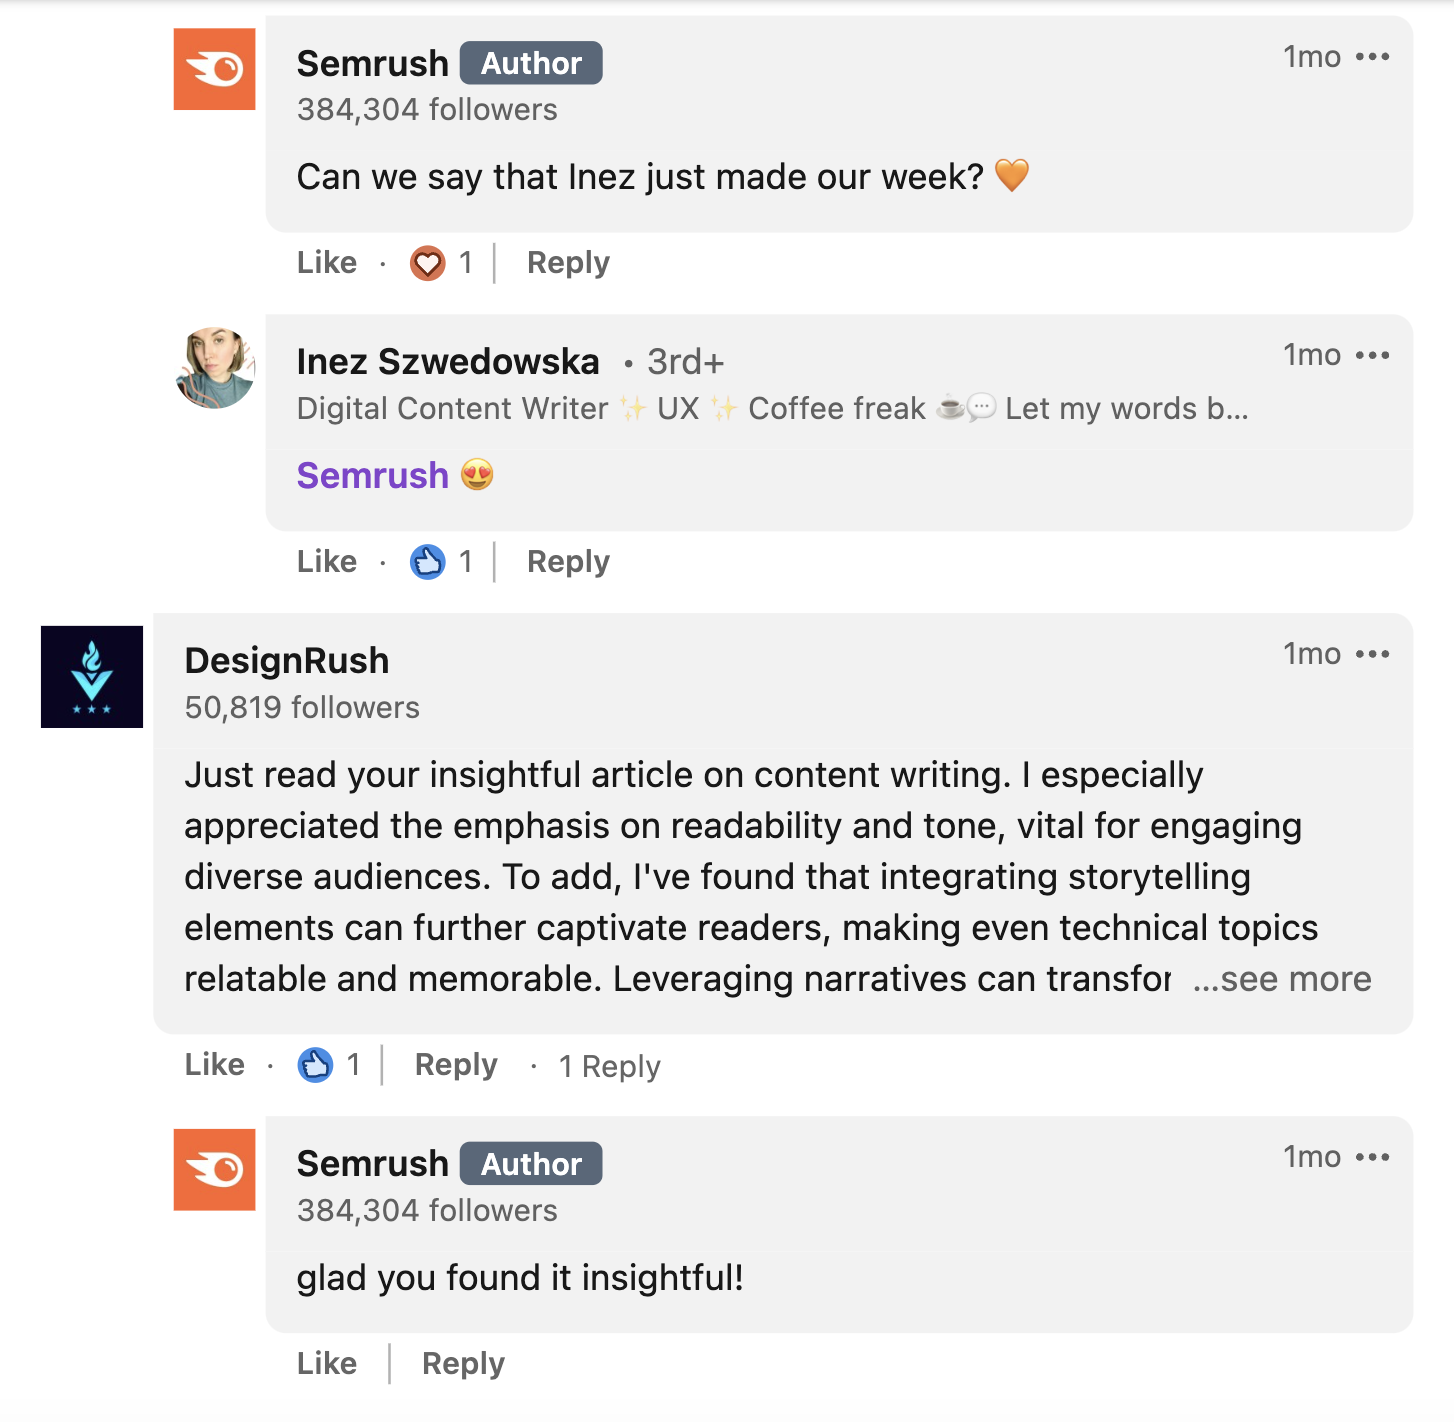 An example of Semrush's responses under LinkedIn comments section